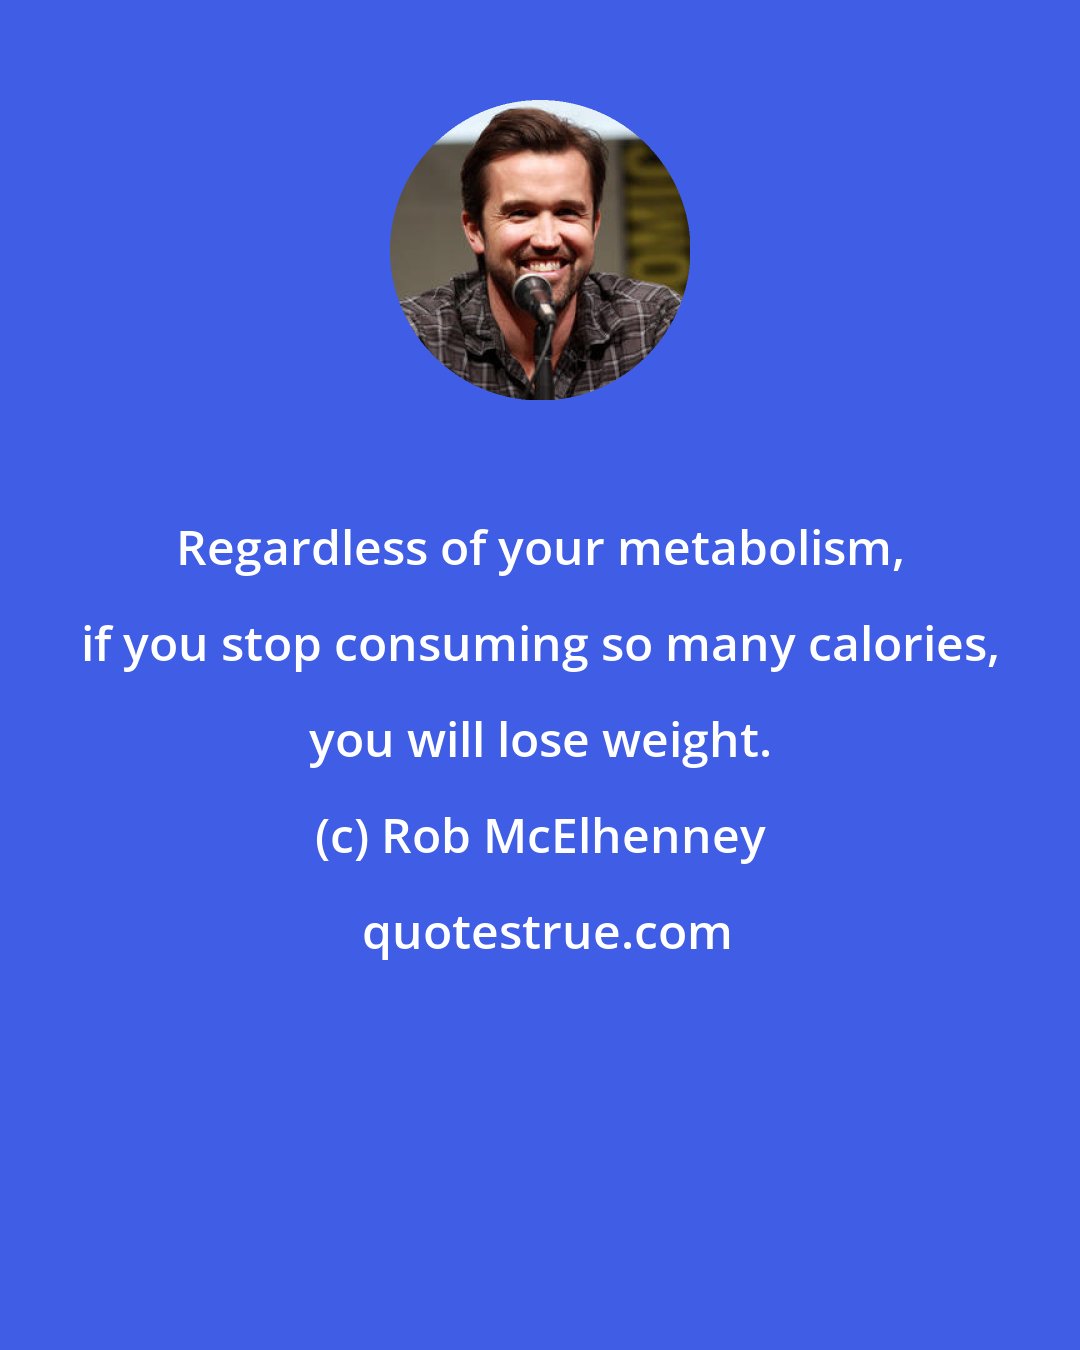 Rob McElhenney: Regardless of your metabolism, if you stop consuming so many calories, you will lose weight.